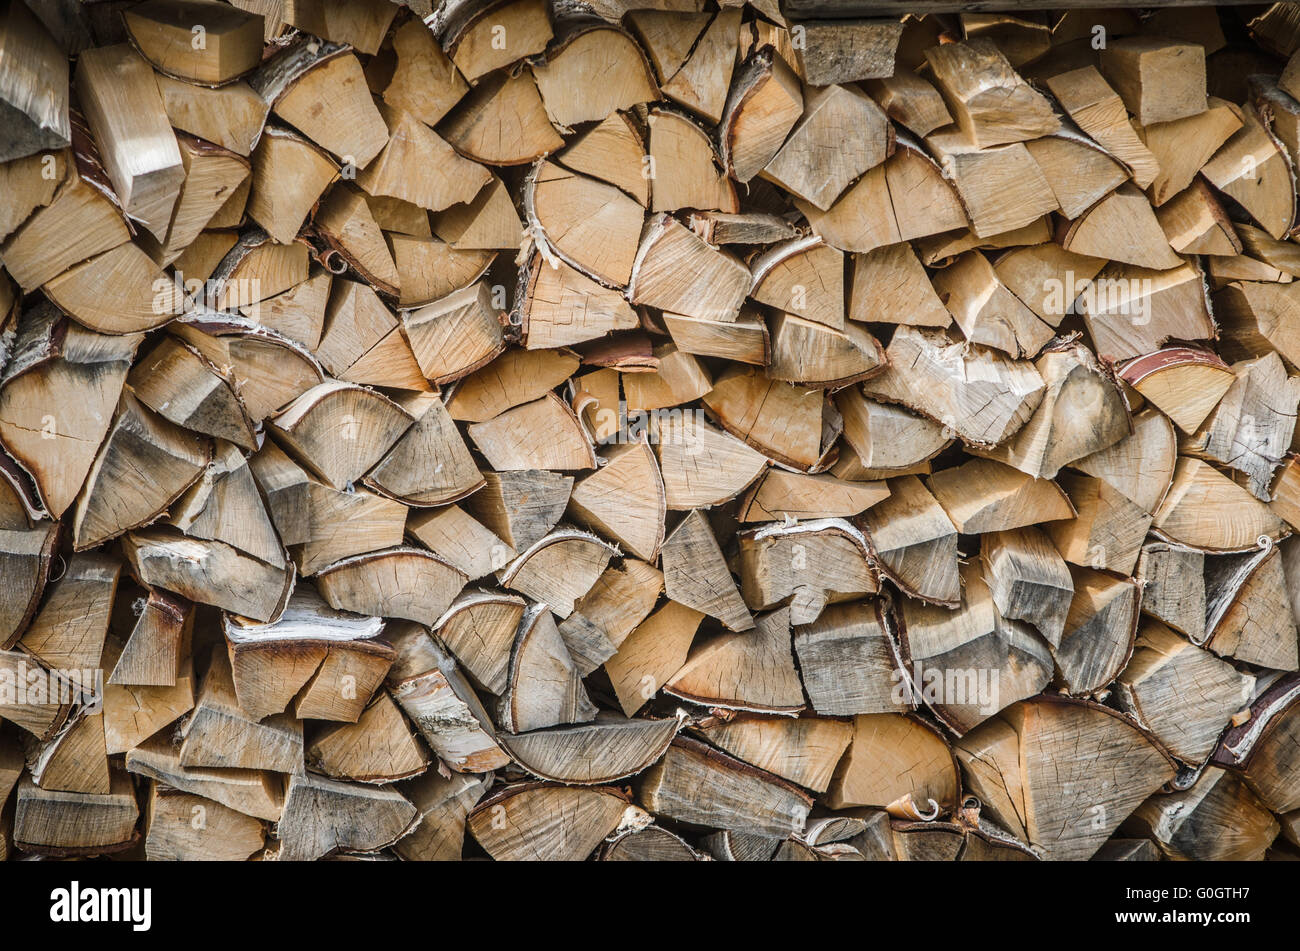 folded rows of firewood, close-up Stock Photo